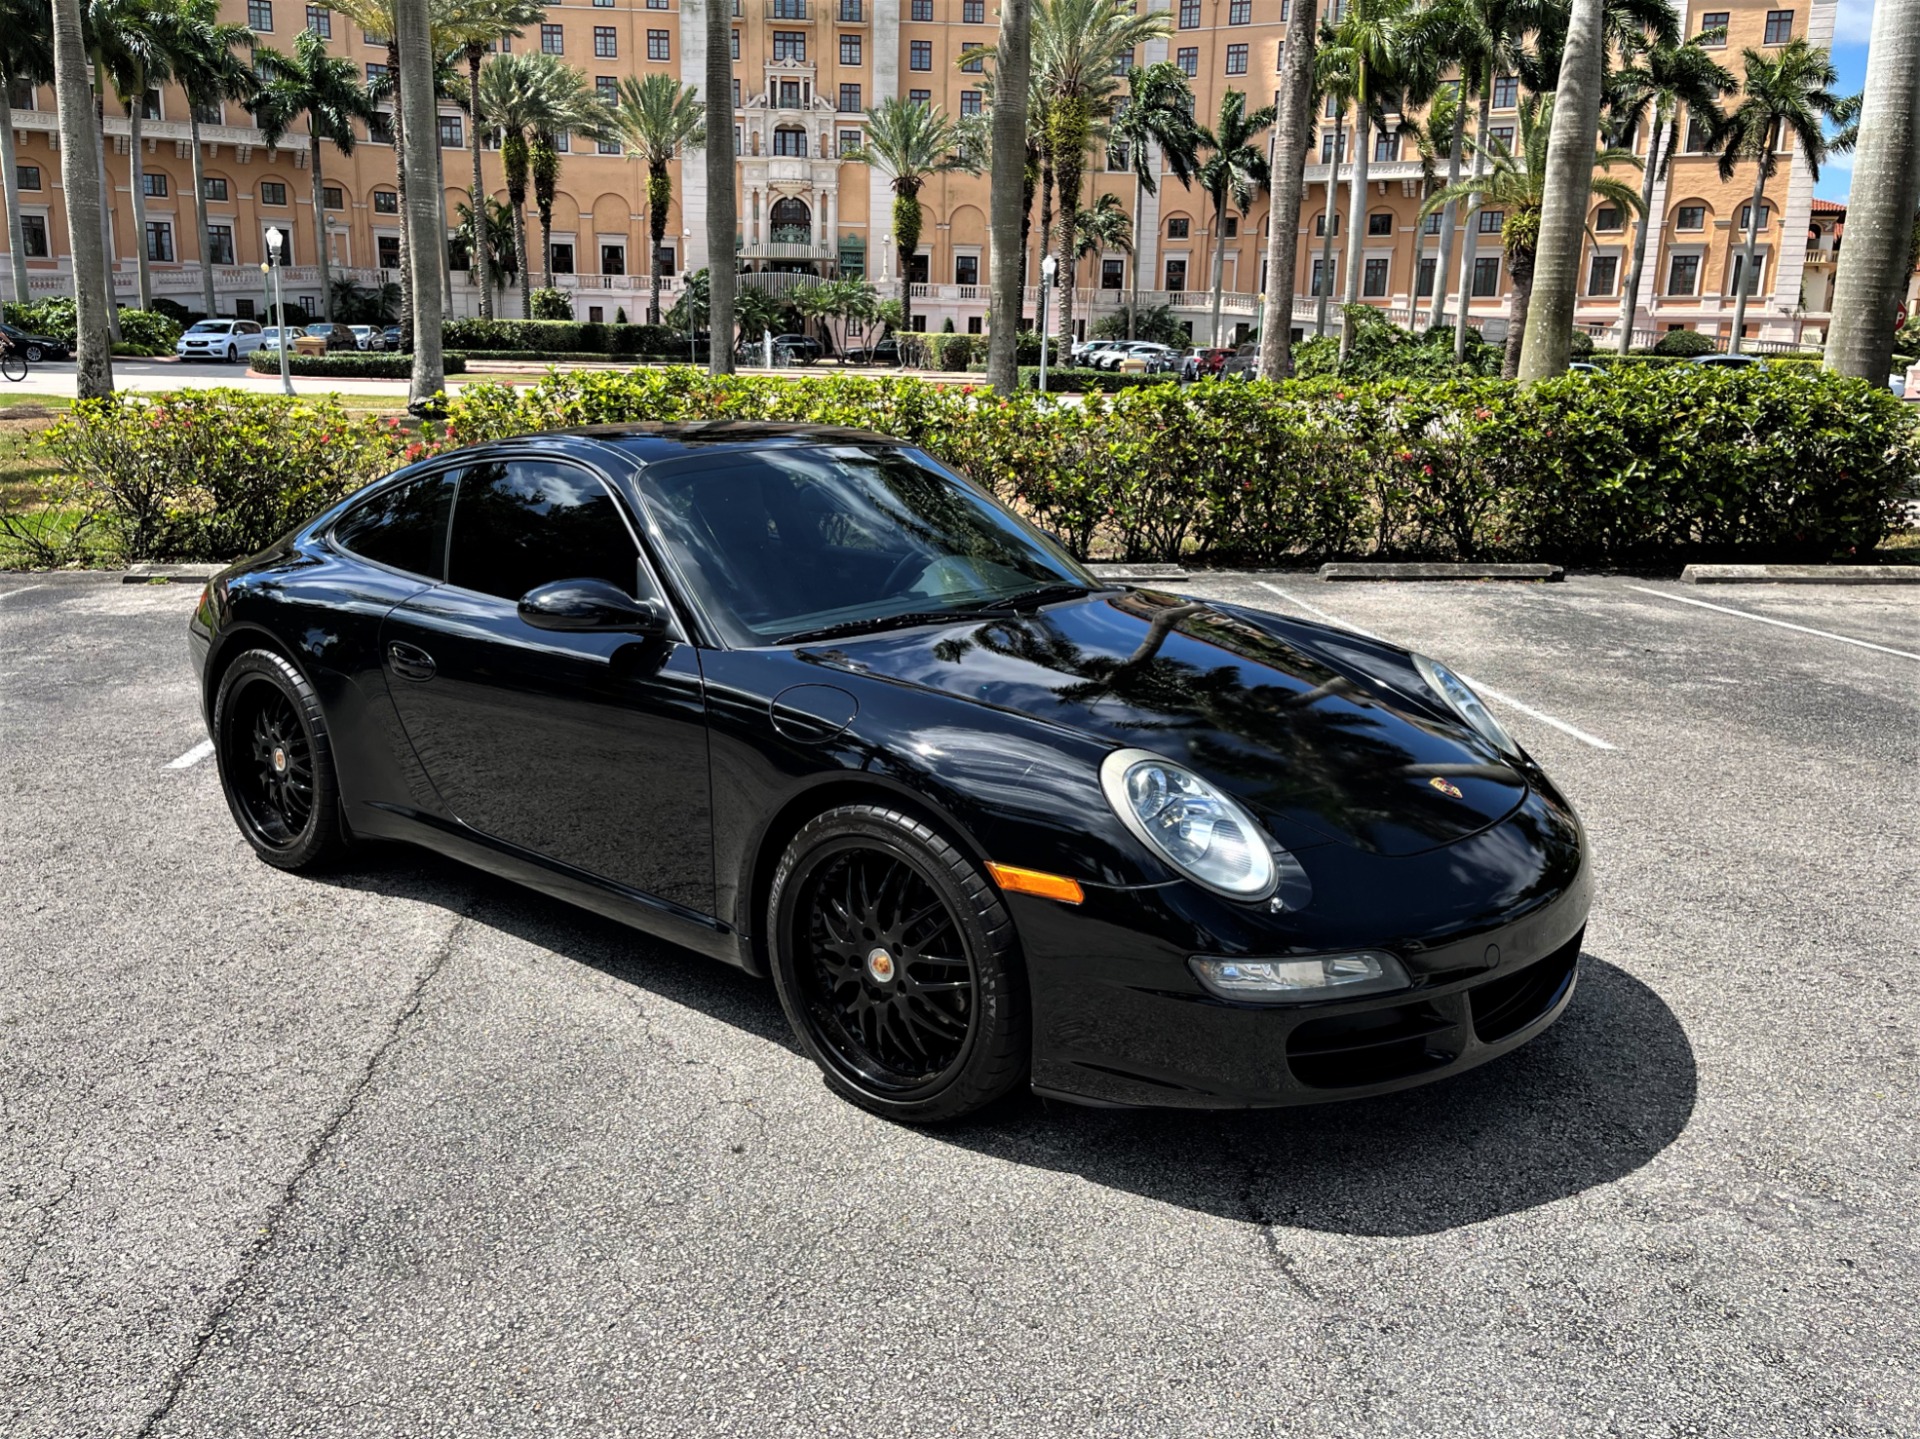 Used 2008 Porsche 911 Carrera for sale Sold at The Gables Sports Cars in Miami FL 33146 2